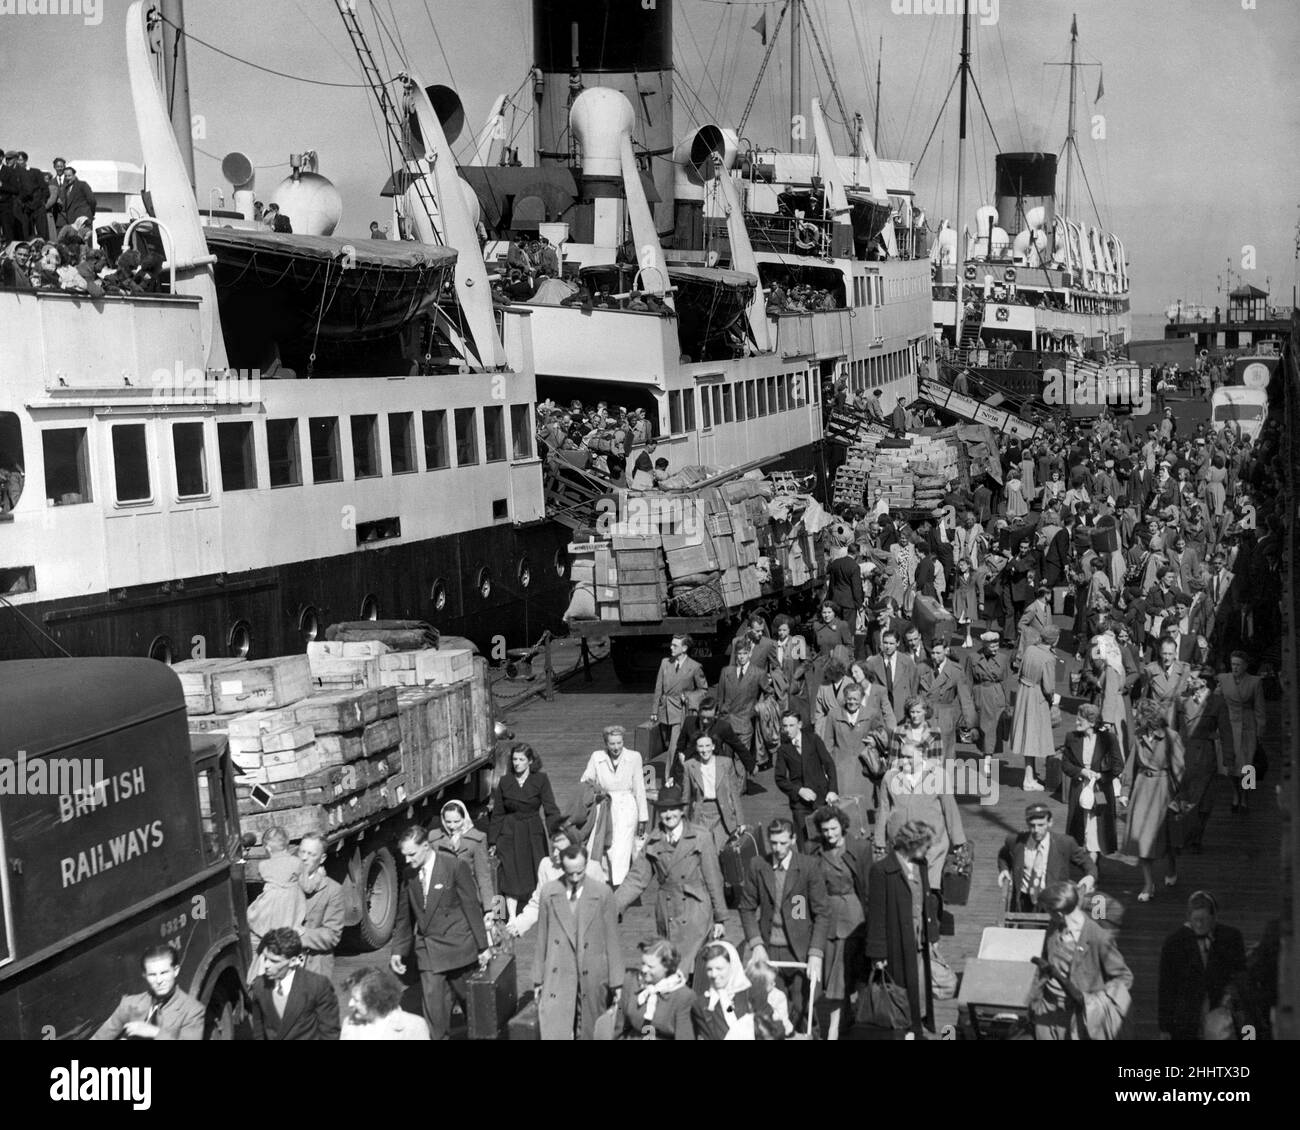 Holidaymakers returning from the Isle of Man make their way along Liverpool landing stage from the steamer ship Mona Isle. The Ben My chree ship behind loads up to take another shipful for their holiday, Merseyside. 4th August 1951 Stock Photo